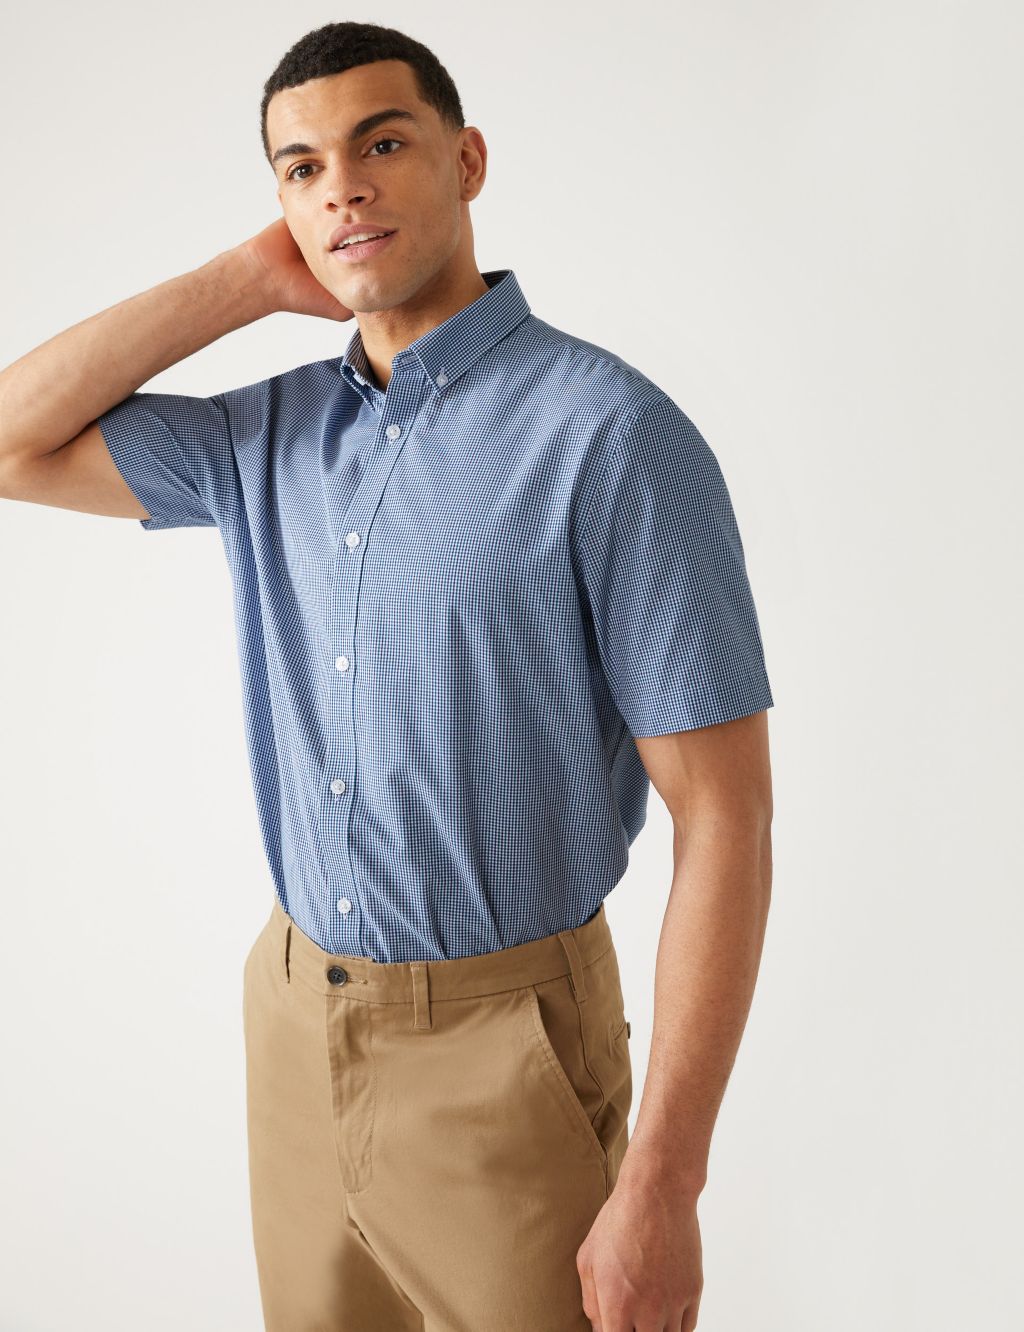 Page 3 - Men’s Navy Shirts | M&S